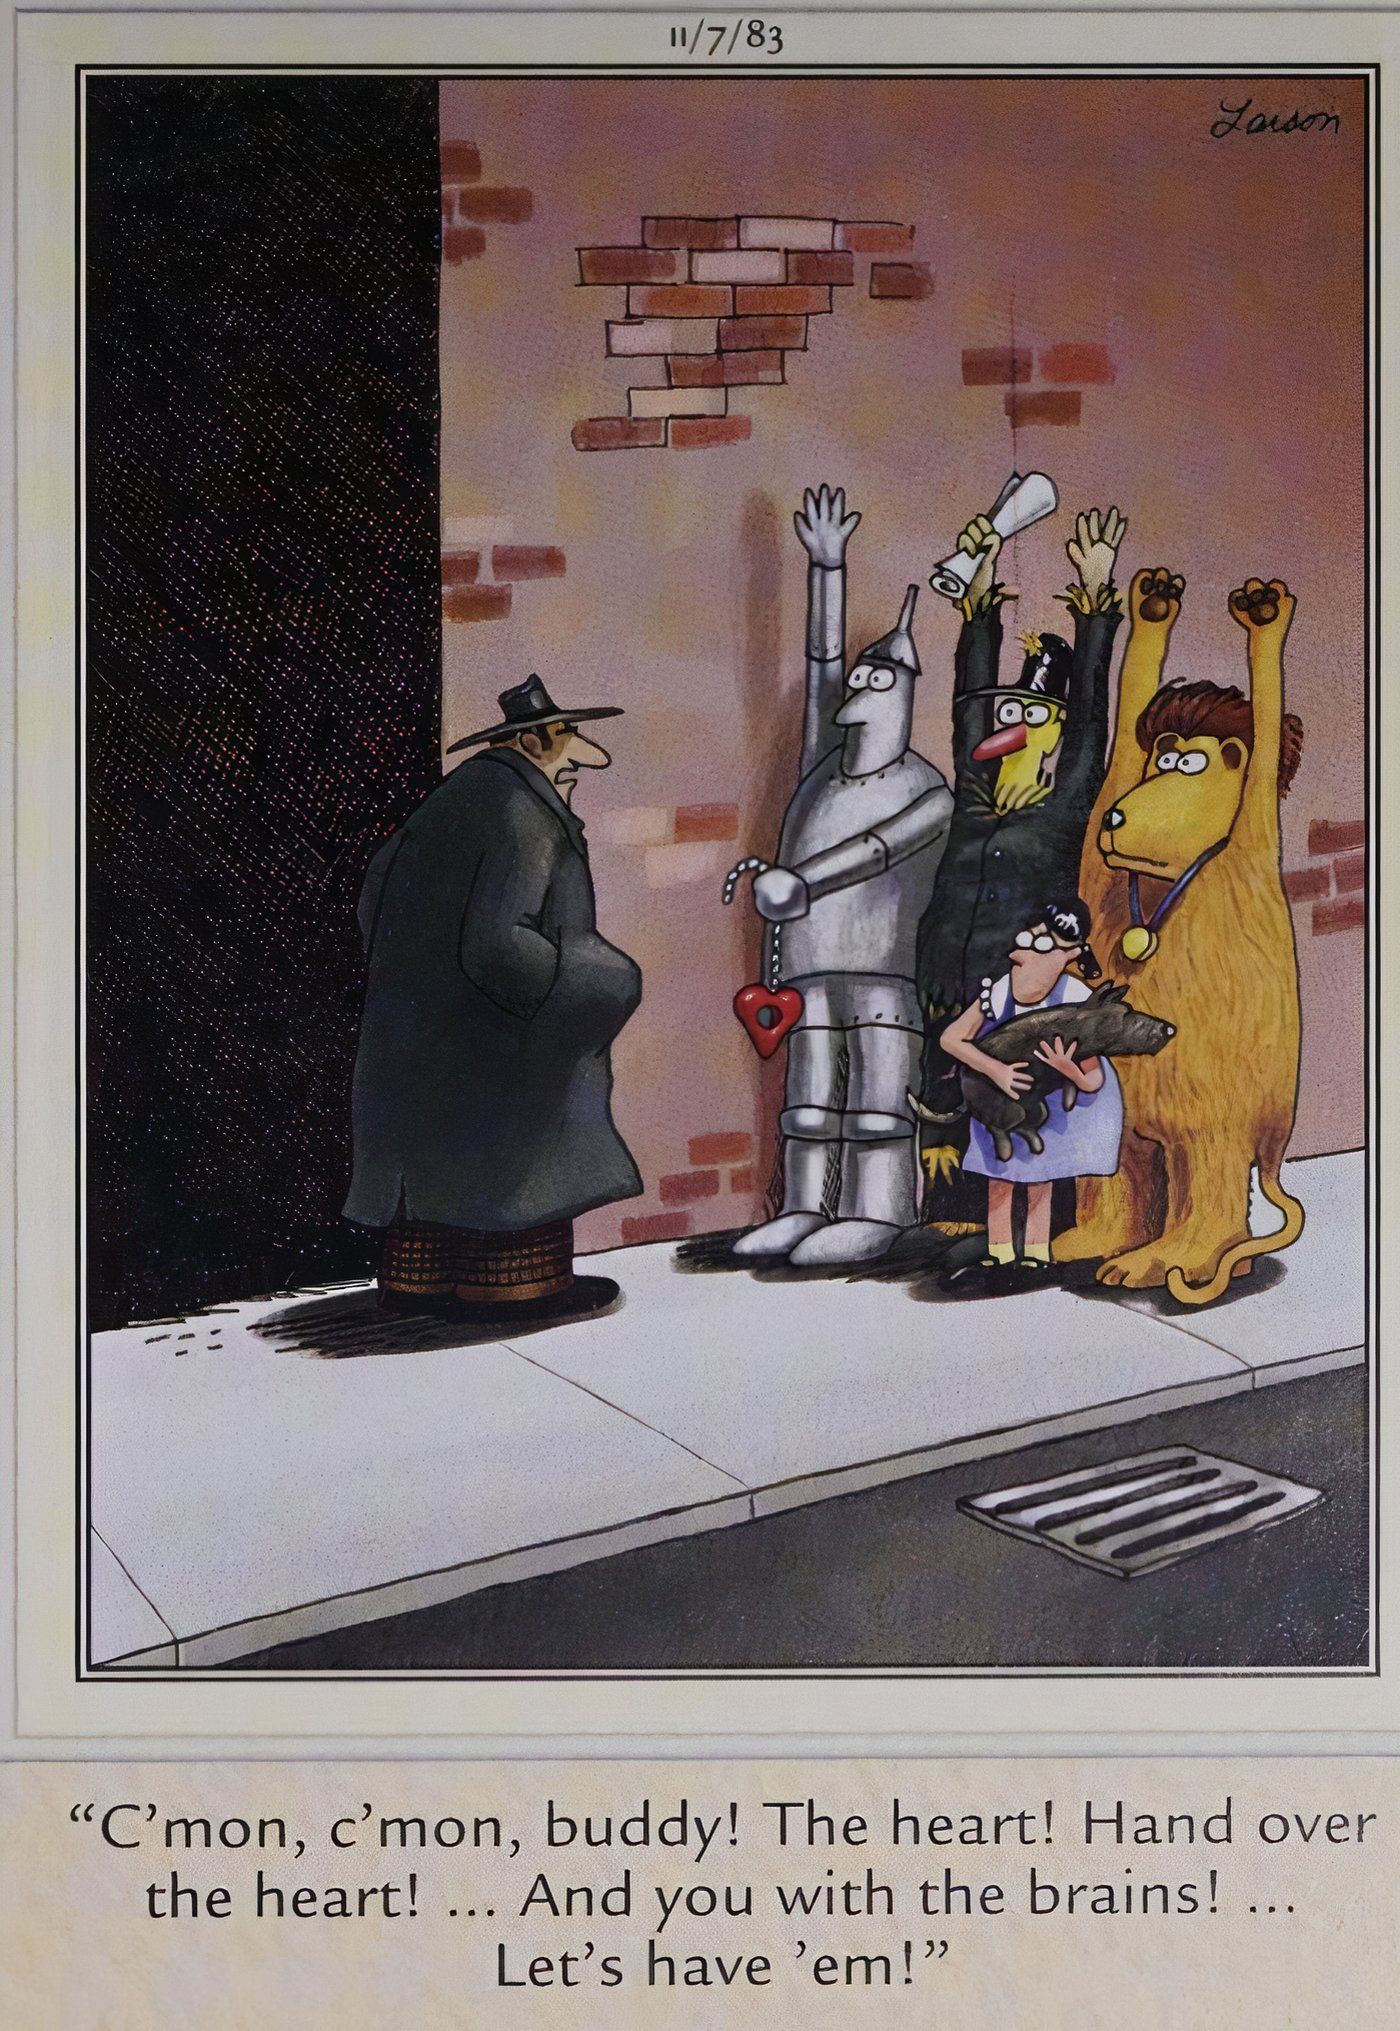 Far Side, man in a trench coat mugs the characters from Wizard of Oz